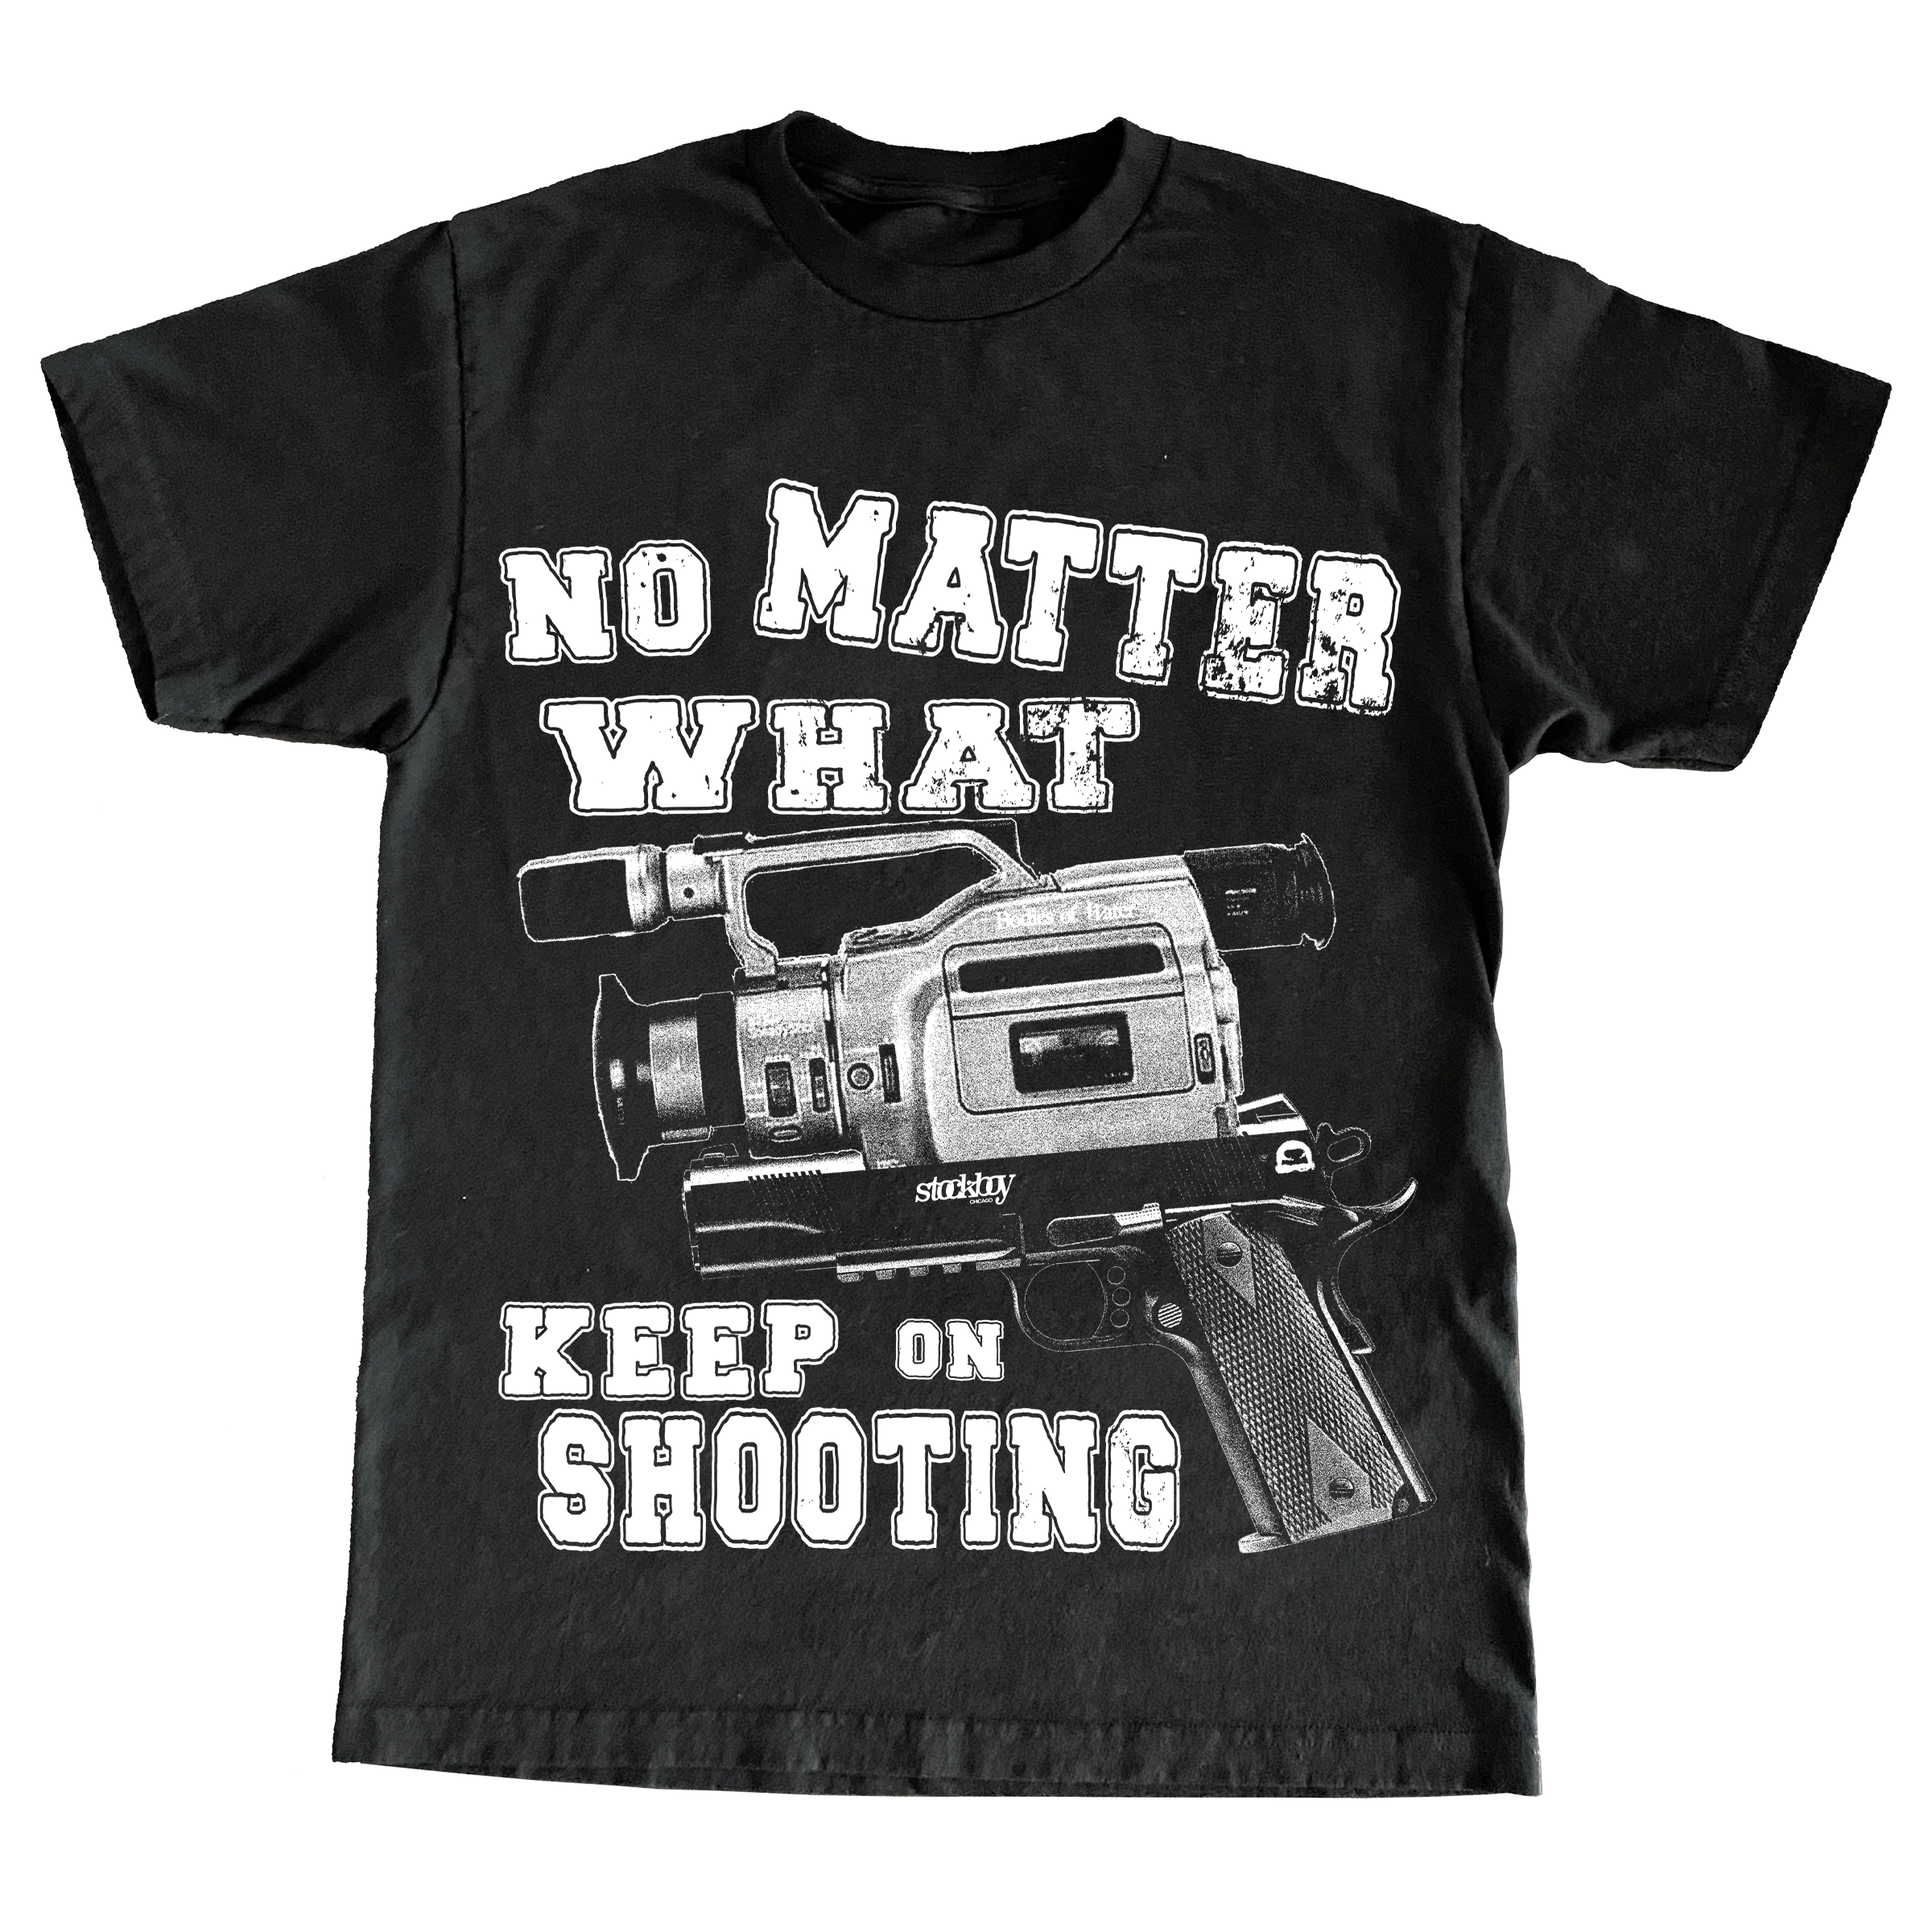 Dont Stop Shooting Tee 20 USD (Sold Out)